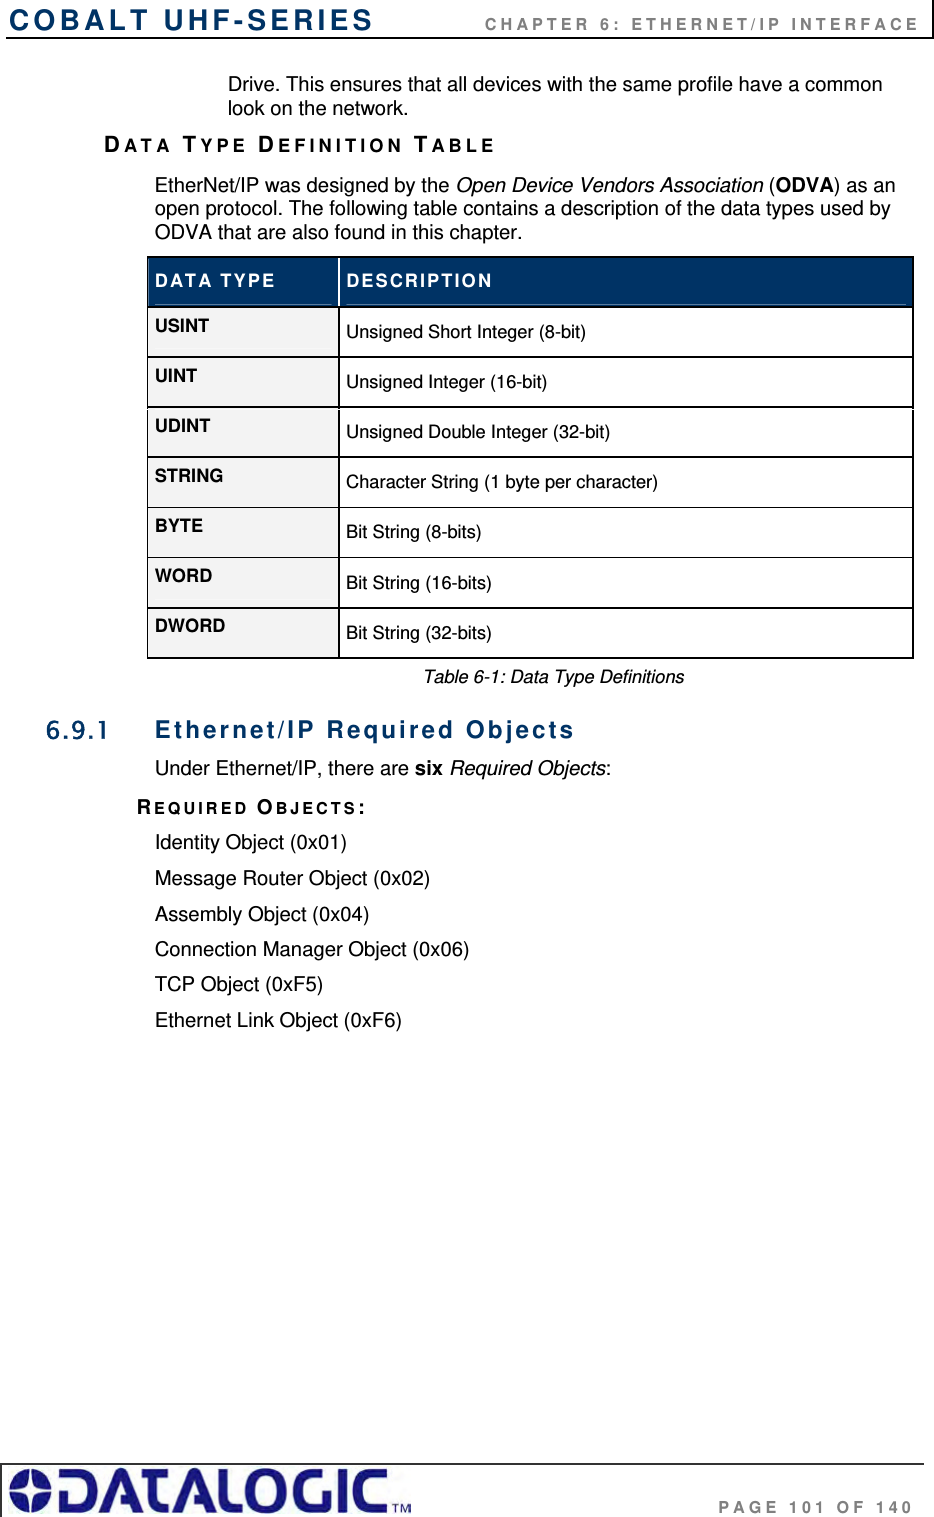 COBALT UHF-SERIES    CHAPTER 6: ETHERNET/IP INTERFACE                                     PAGE 101 OF 140 Drive. This ensures that all devices with the same profile have a common look on the network.   DATA TYPE DEFINITION TABLE EtherNet/IP was designed by the Open Device Vendors Association (ODVA) as an open protocol. The following table contains a description of the data types used by ODVA that are also found in this chapter. DATA TYPE  DESCRIPTION USINT  Unsigned Short Integer (8-bit) UINT   Unsigned Integer (16-bit) UDINT  Unsigned Double Integer (32-bit) STRING  Character String (1 byte per character) BYTE  Bit String (8-bits) WORD  Bit String (16-bits) DWORD  Bit String (32-bits)                         Table 6-1: Data Type Definitions 6.9.1  Ethernet/IP Required Objects Under Ethernet/IP, there are six Required Objects: REQUIRED OBJECTS:  Identity Object (0x01)  Message Router Object (0x02)  Assembly Object (0x04)  Connection Manager Object (0x06)  TCP Object (0xF5)  Ethernet Link Object (0xF6) 